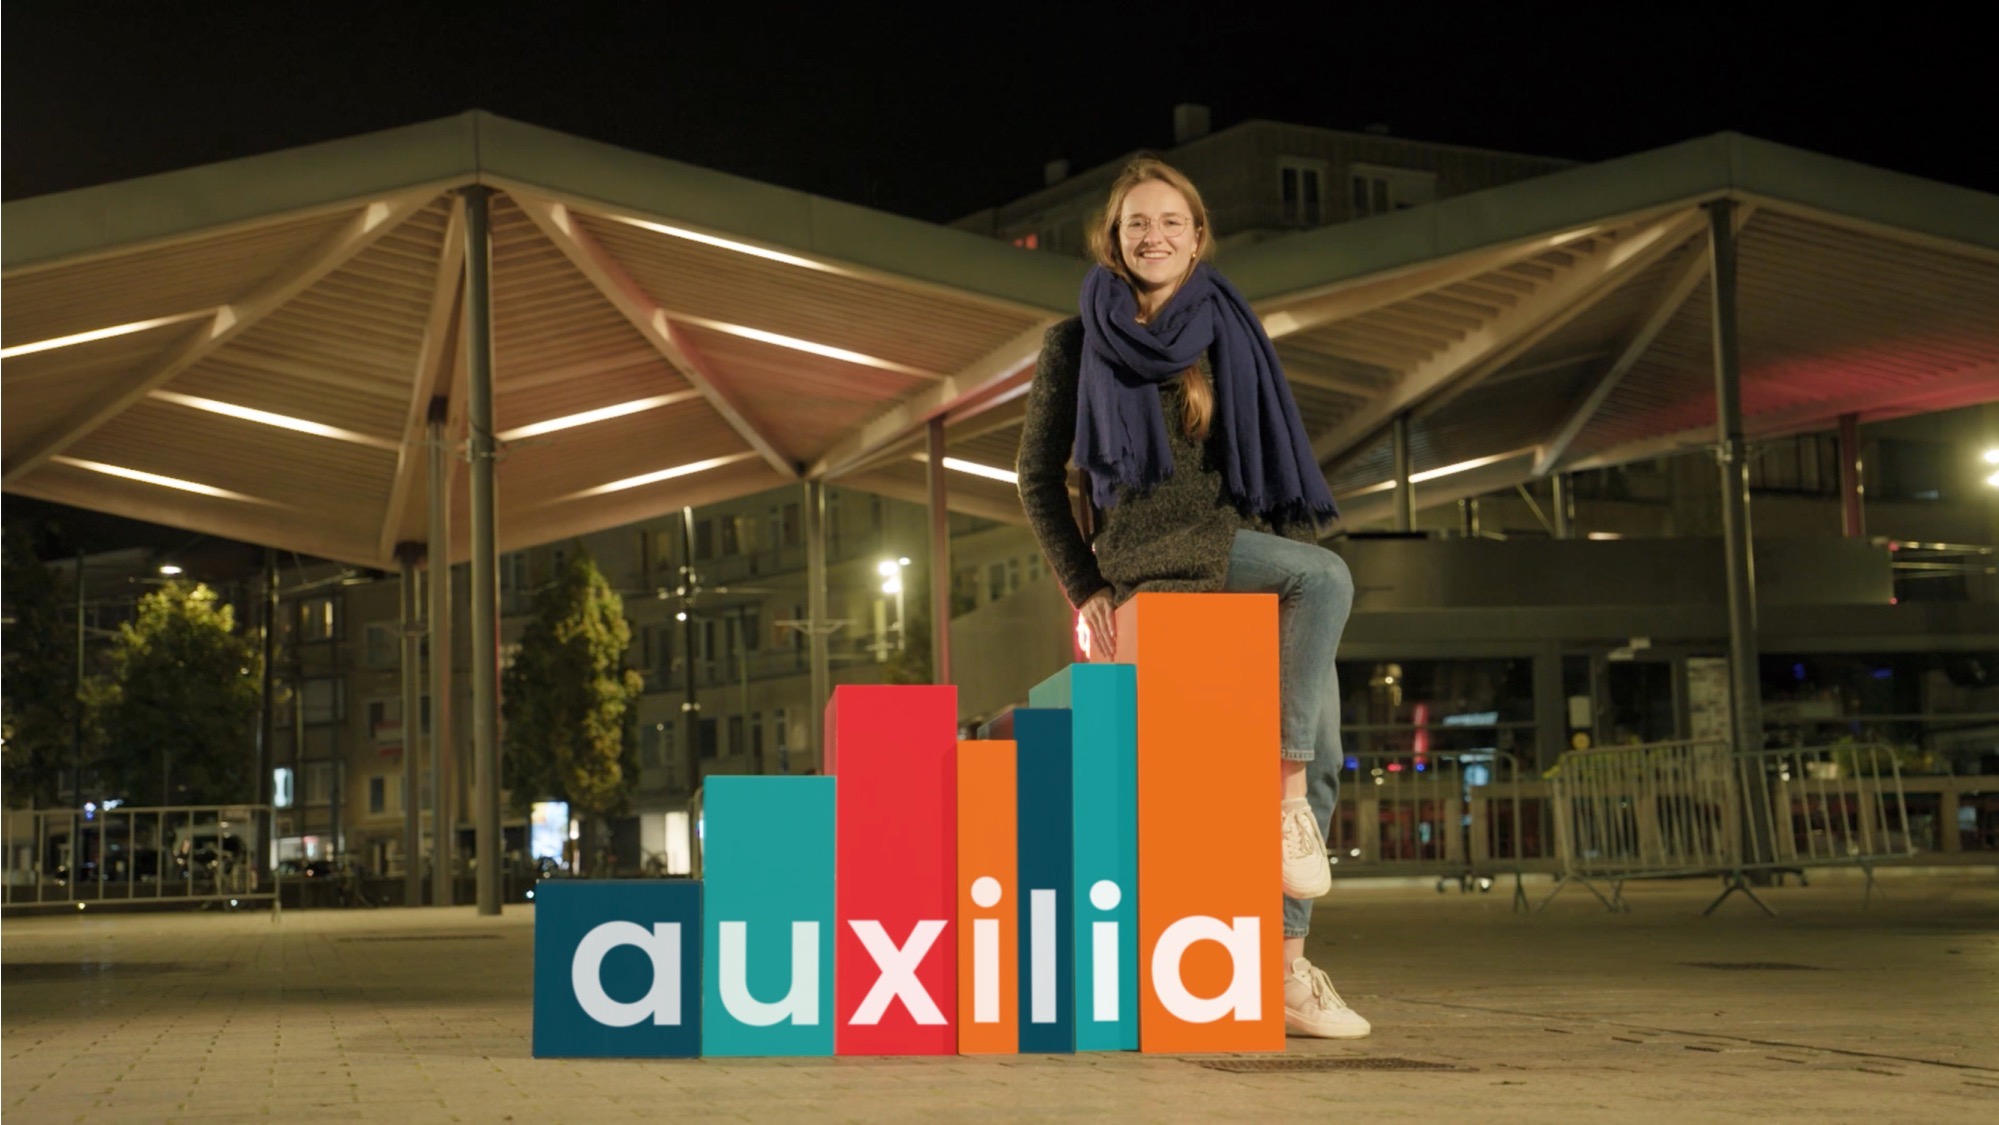 Wervingscampagne Auxilia vzw